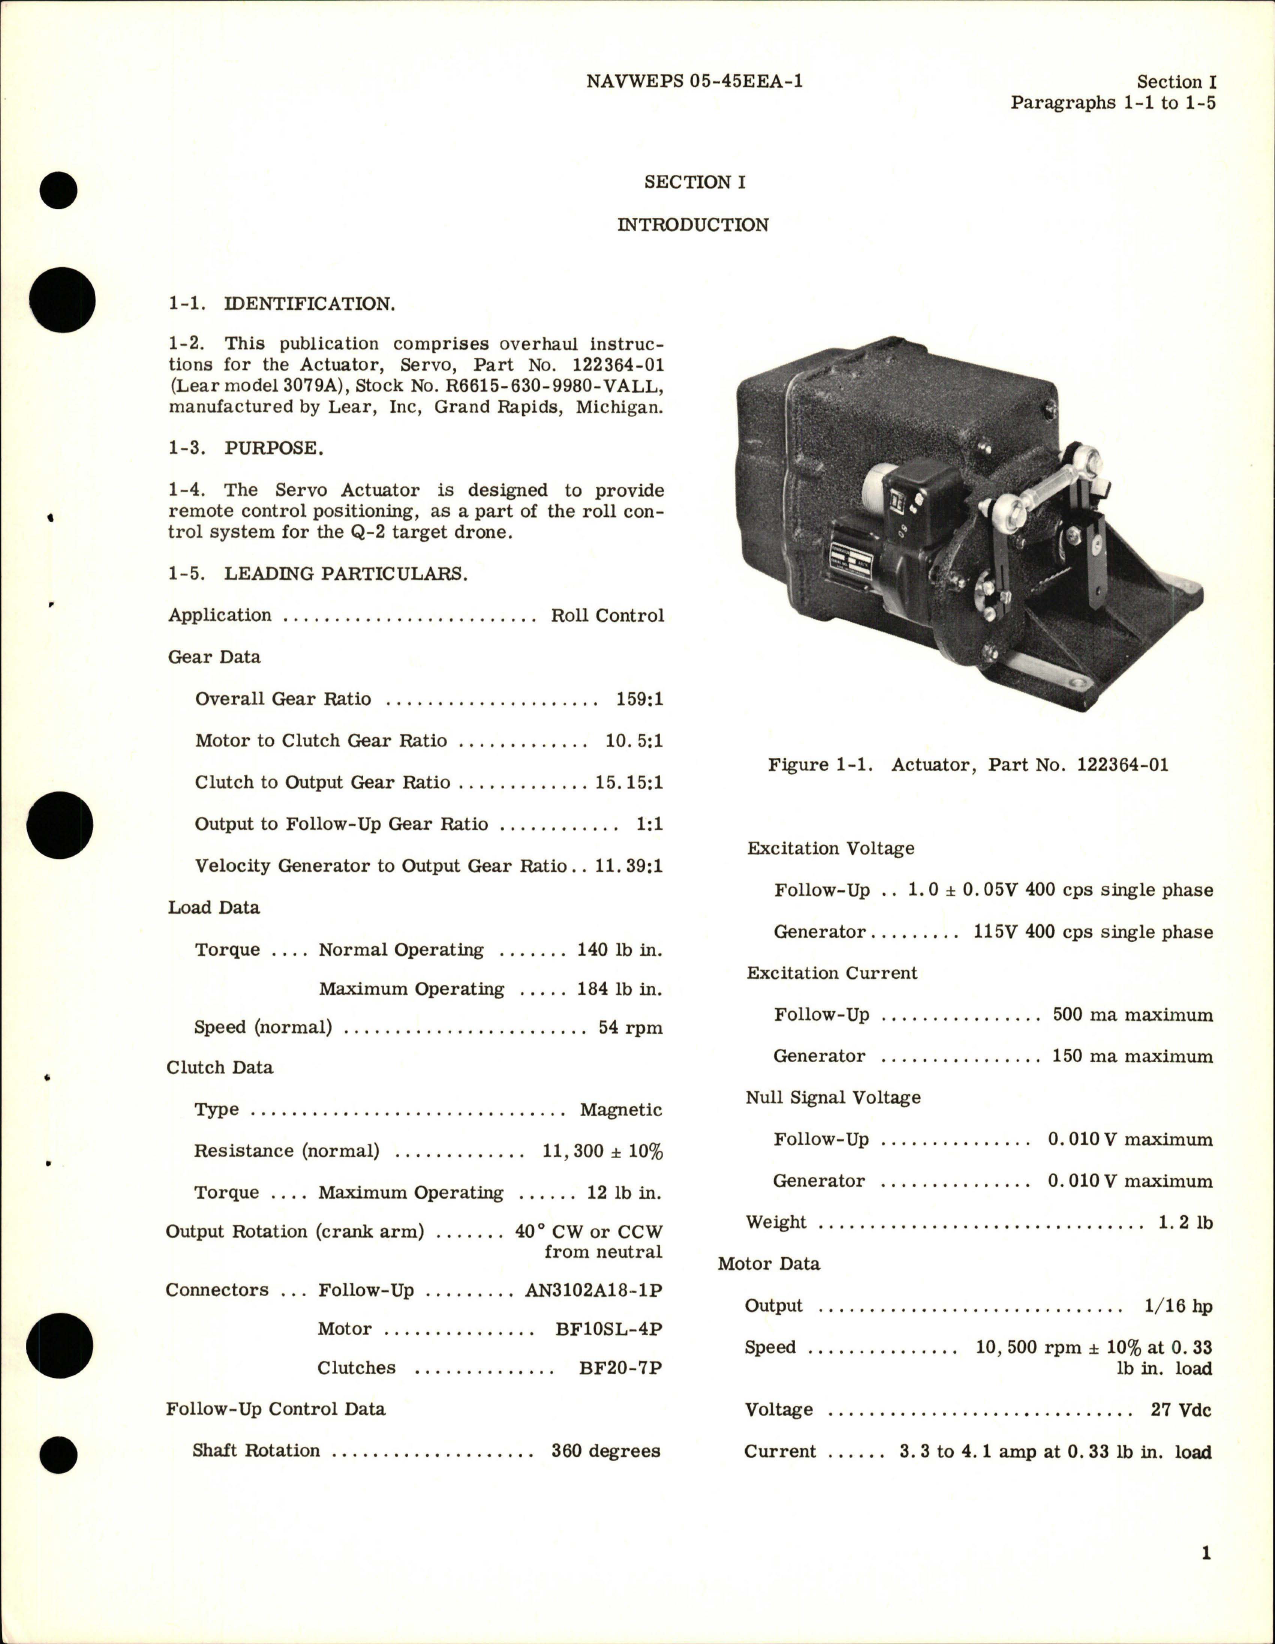 Sample page 5 from AirCorps Library document: Overhaul Instructions for Servo Actuator - Part 122364-01